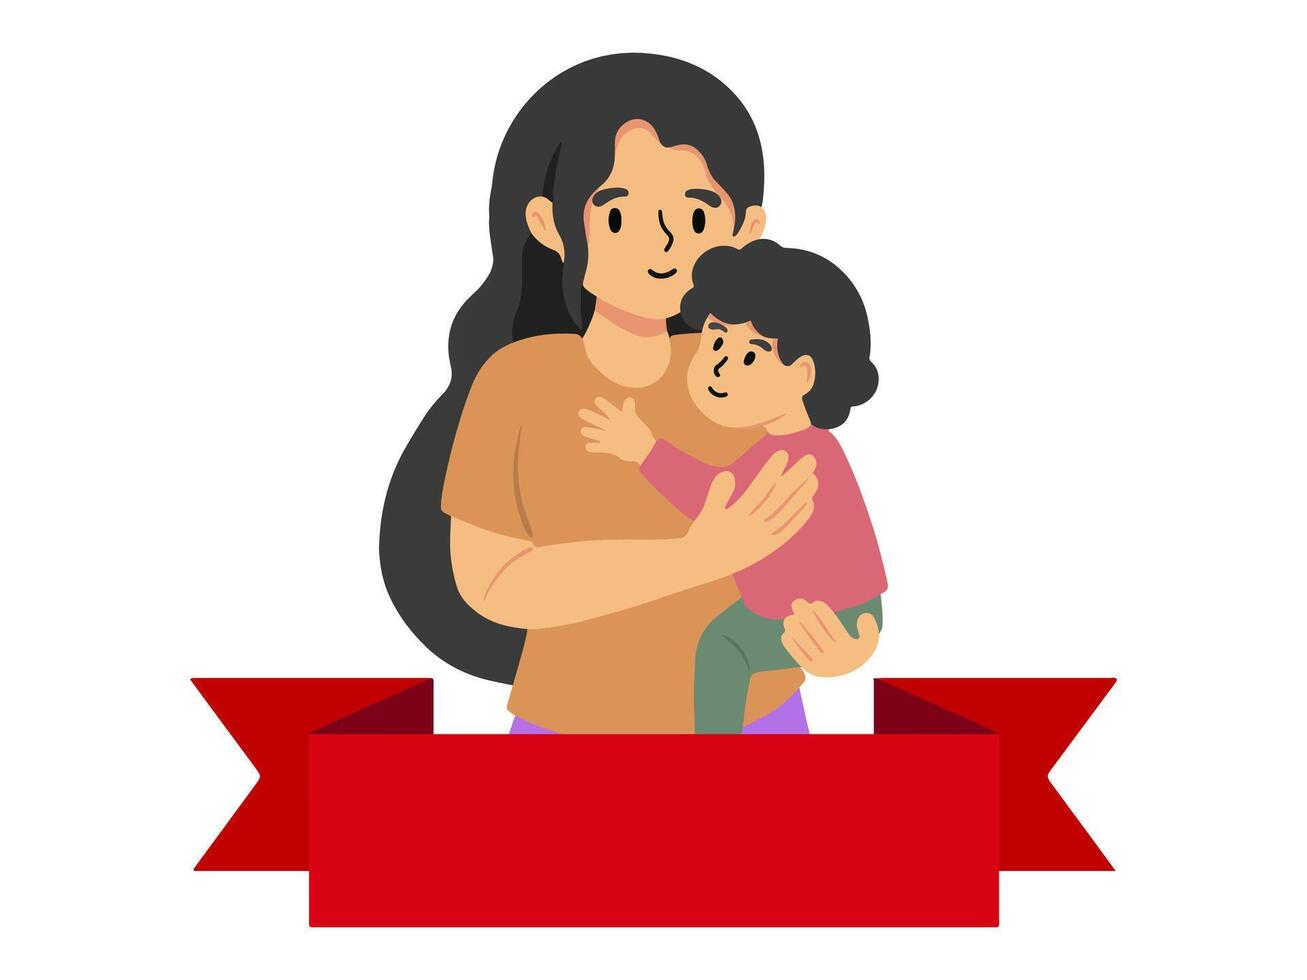 Mother Holding Child Ribbon Background vector